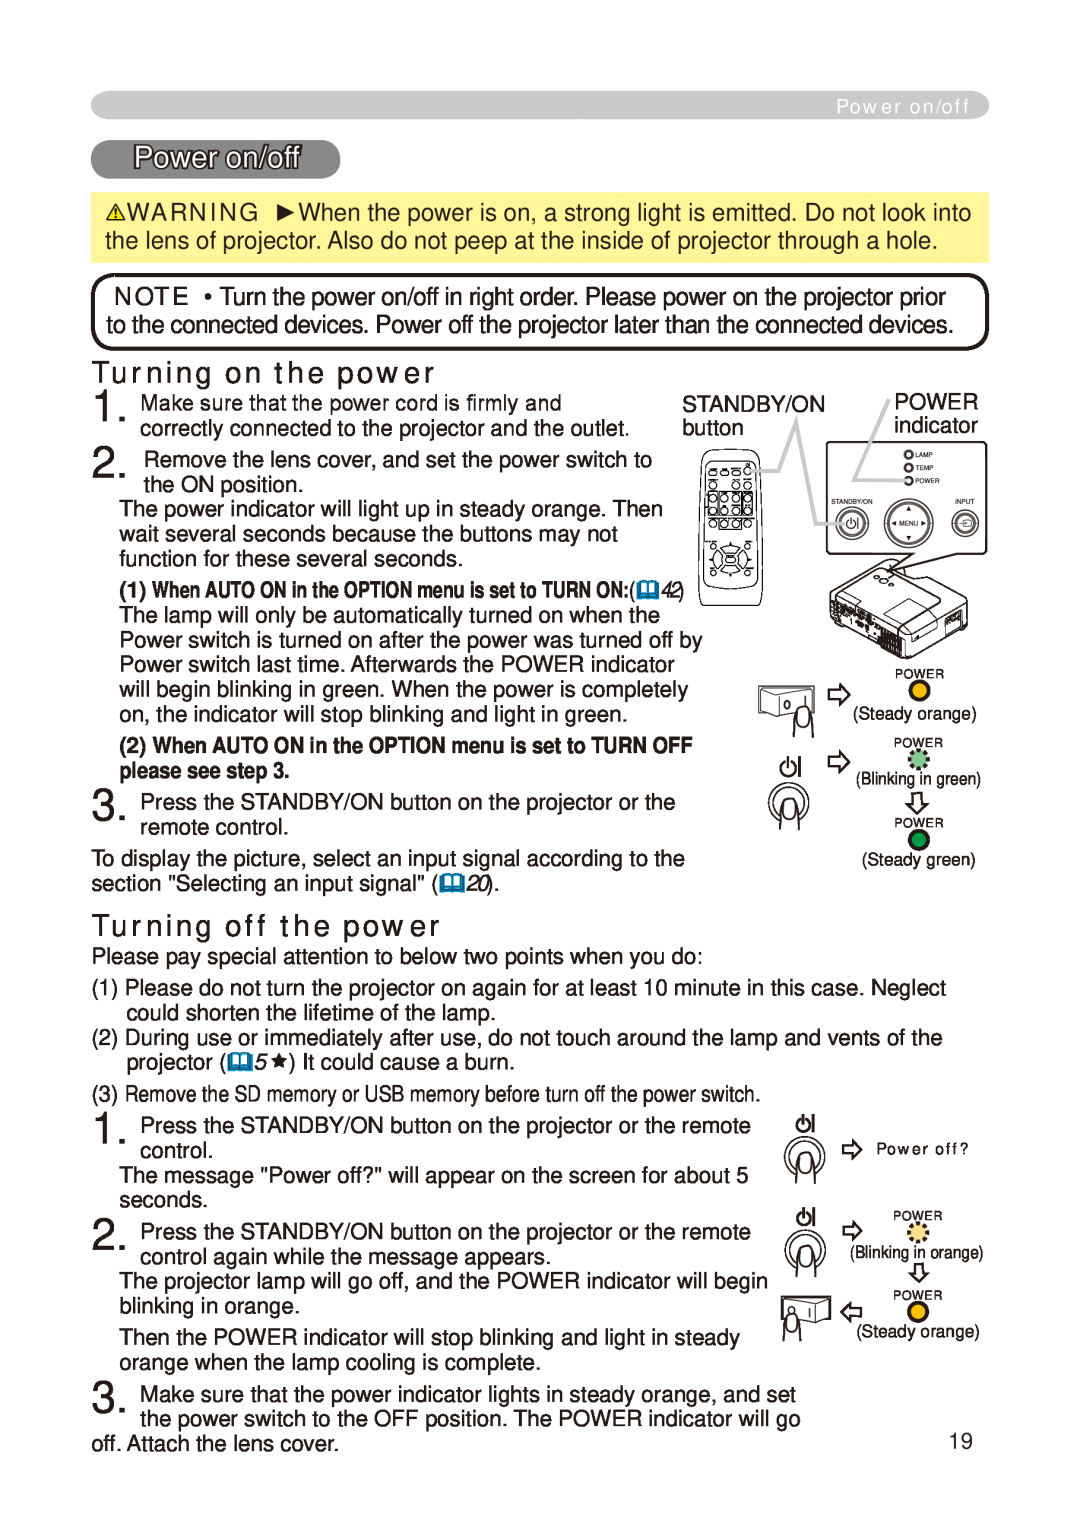 Hitachi CP-X268A user manual Power on/off, Turning on the power, Turning off the power 